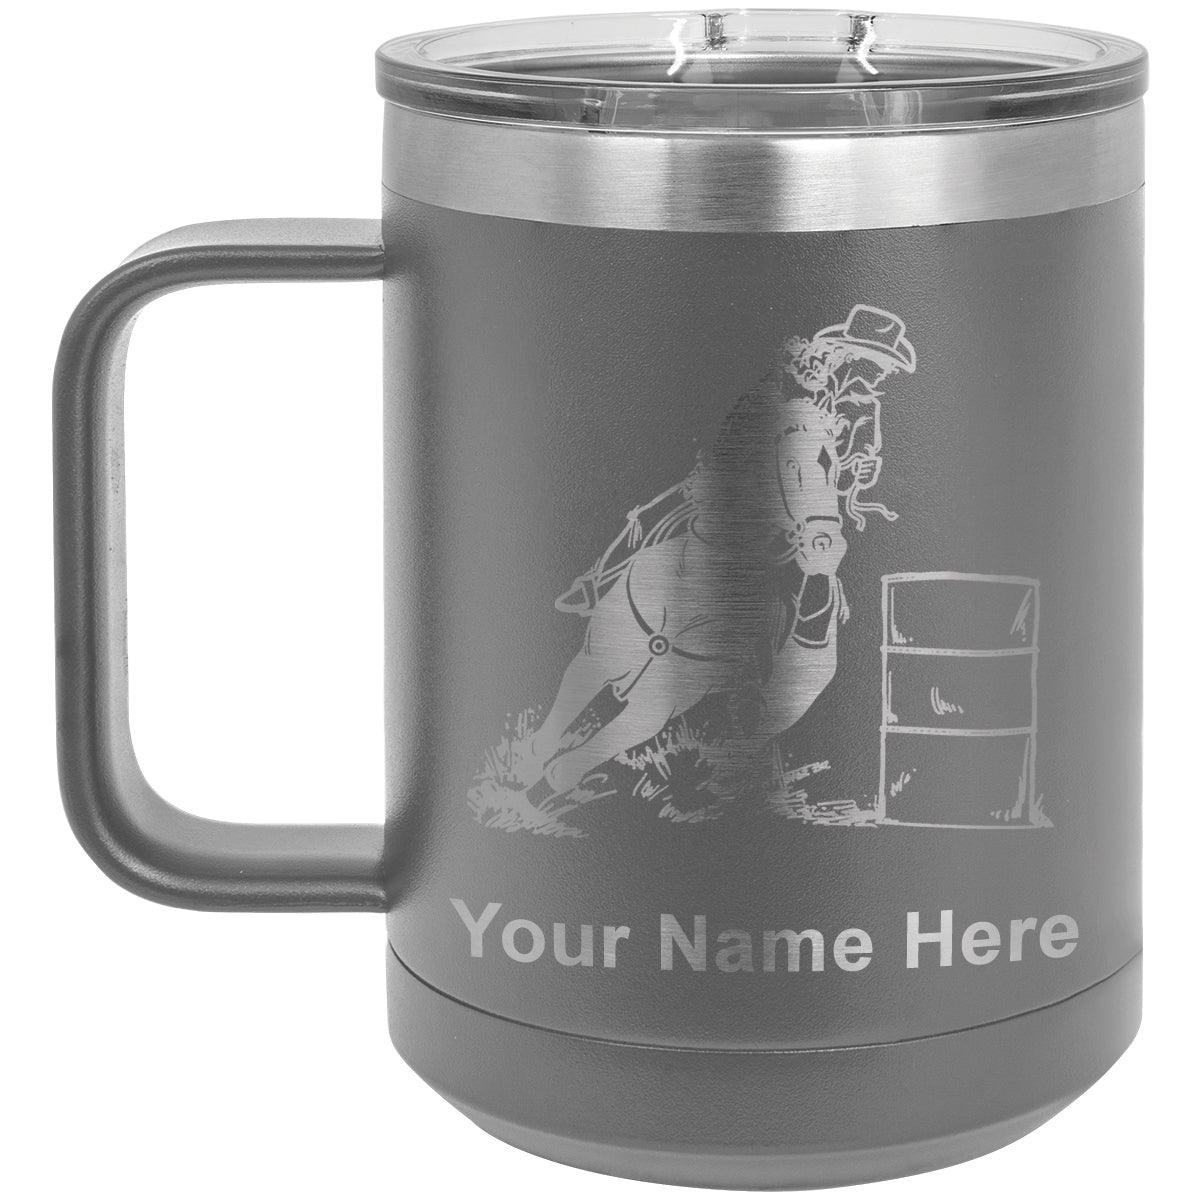 15oz Vacuum Insulated Coffee Mug, Barrel Racer, Personalized Engraving Included